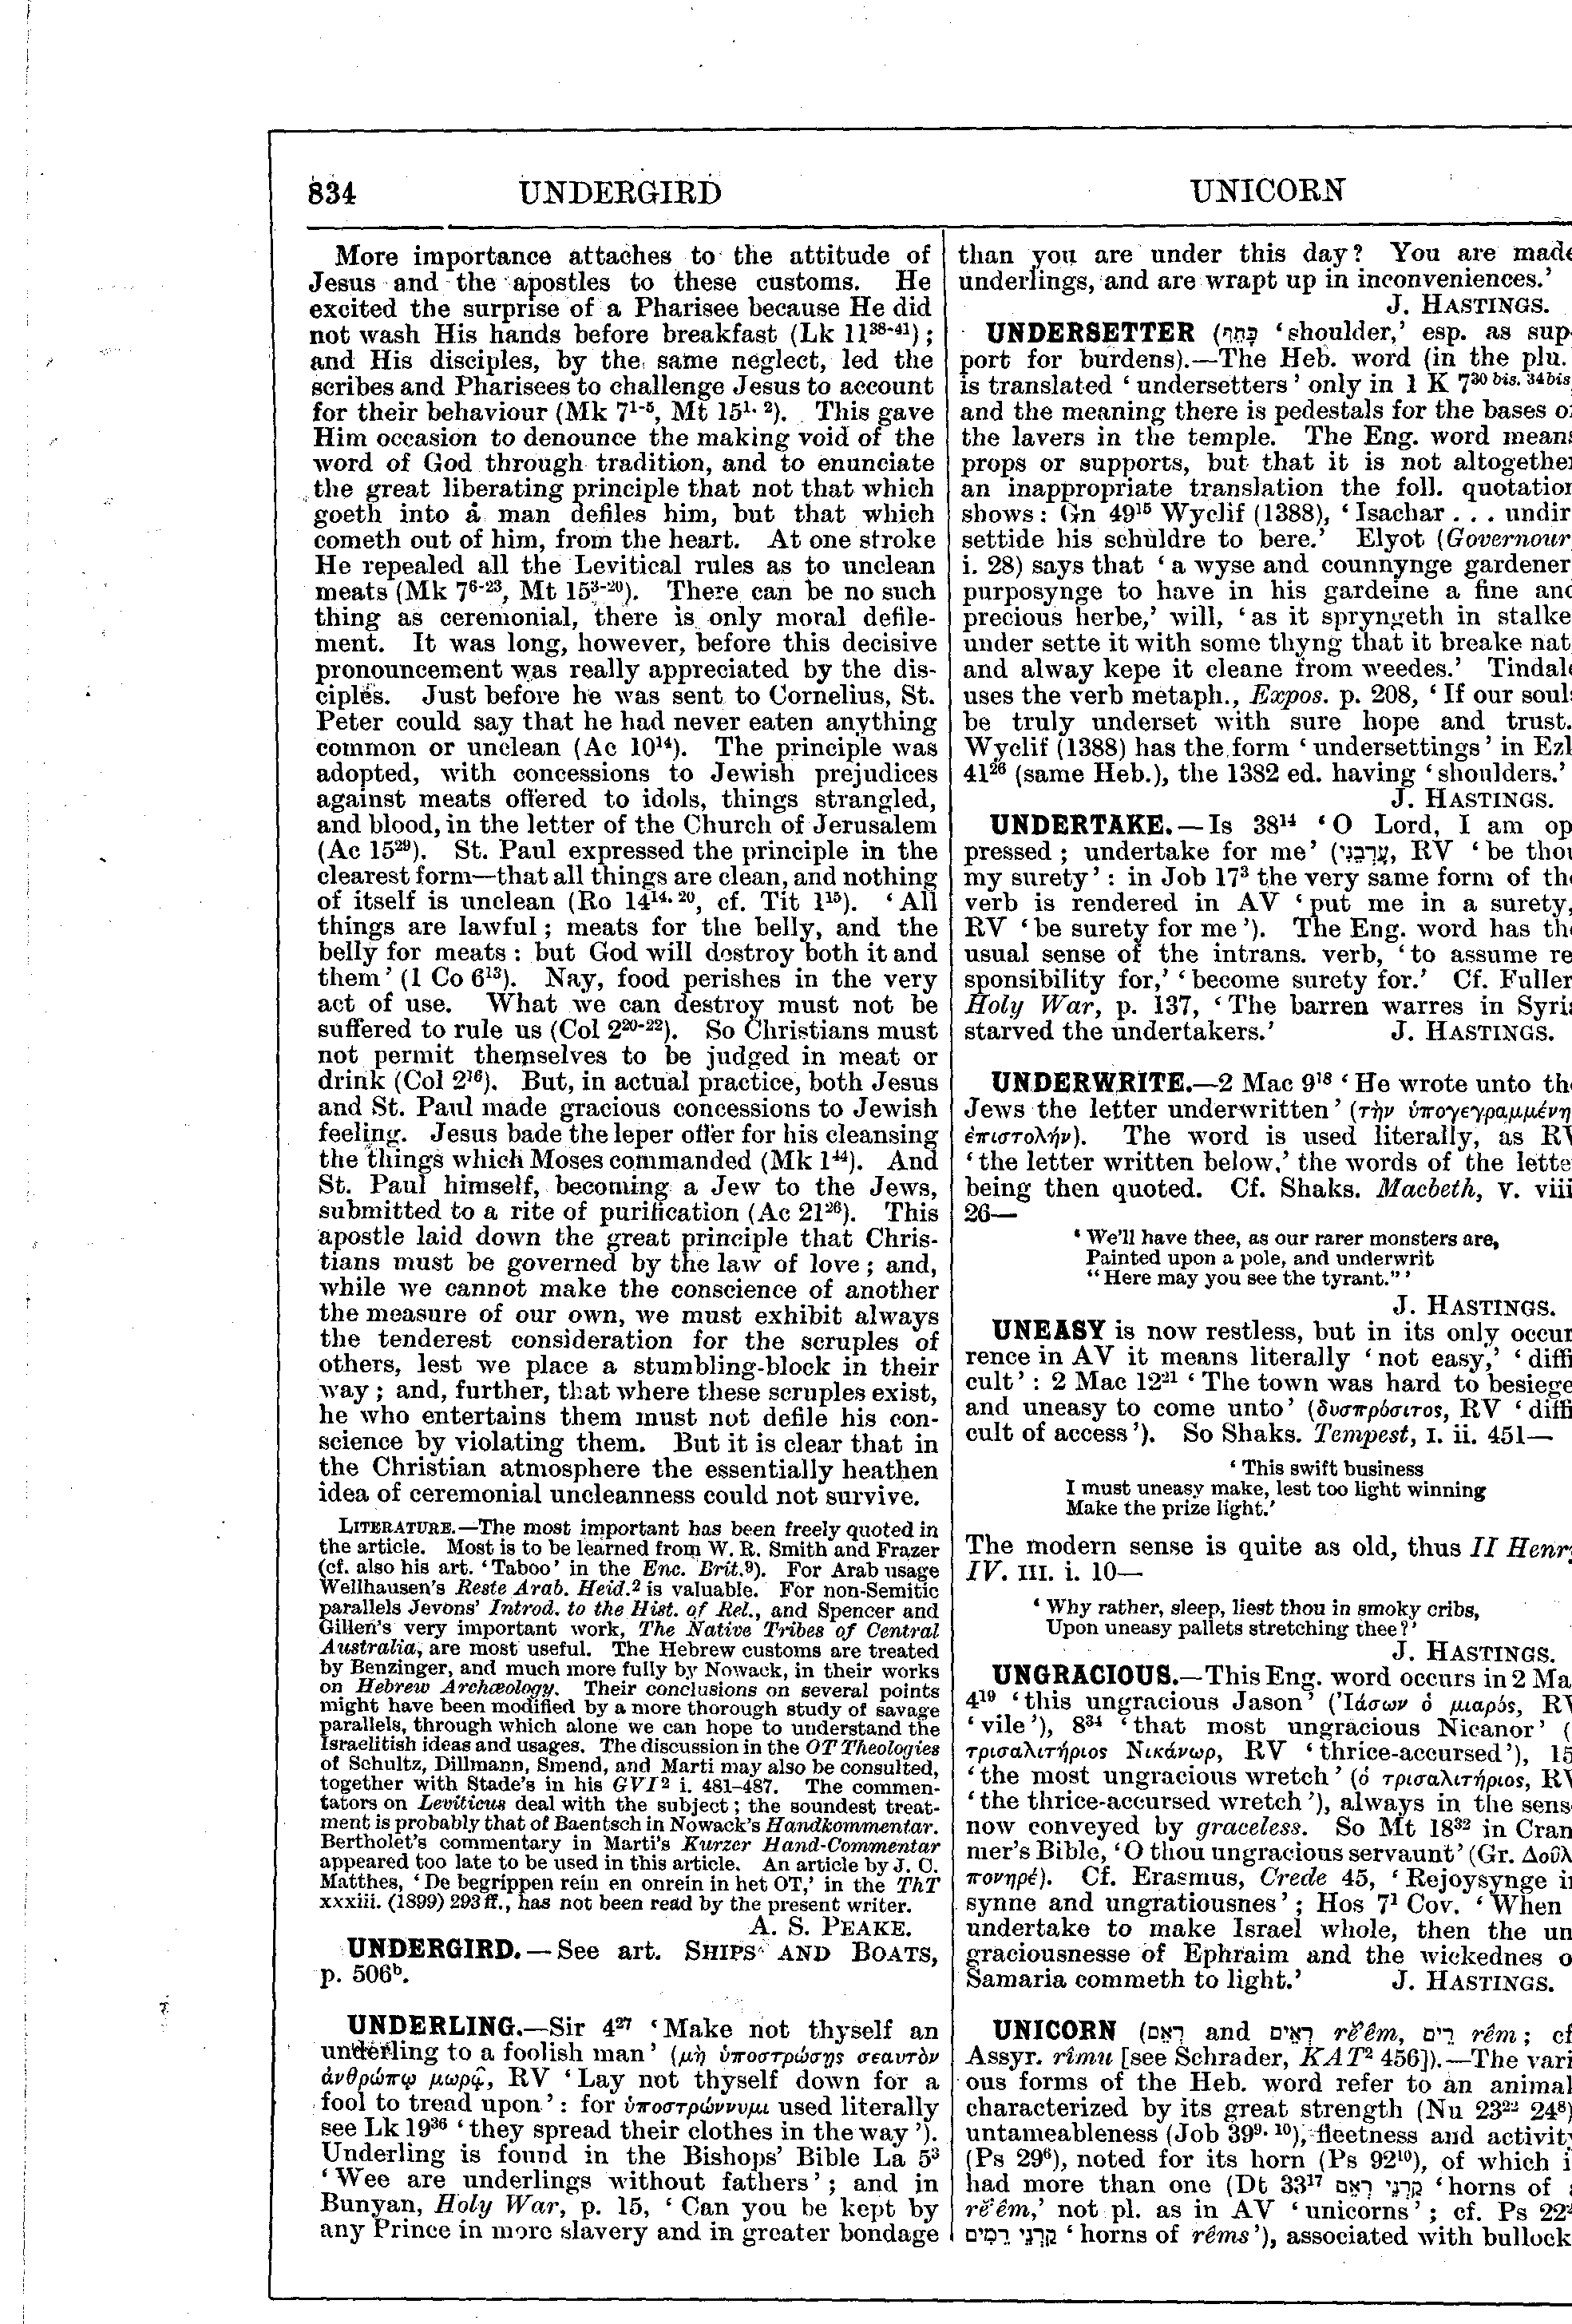 Image of page 834